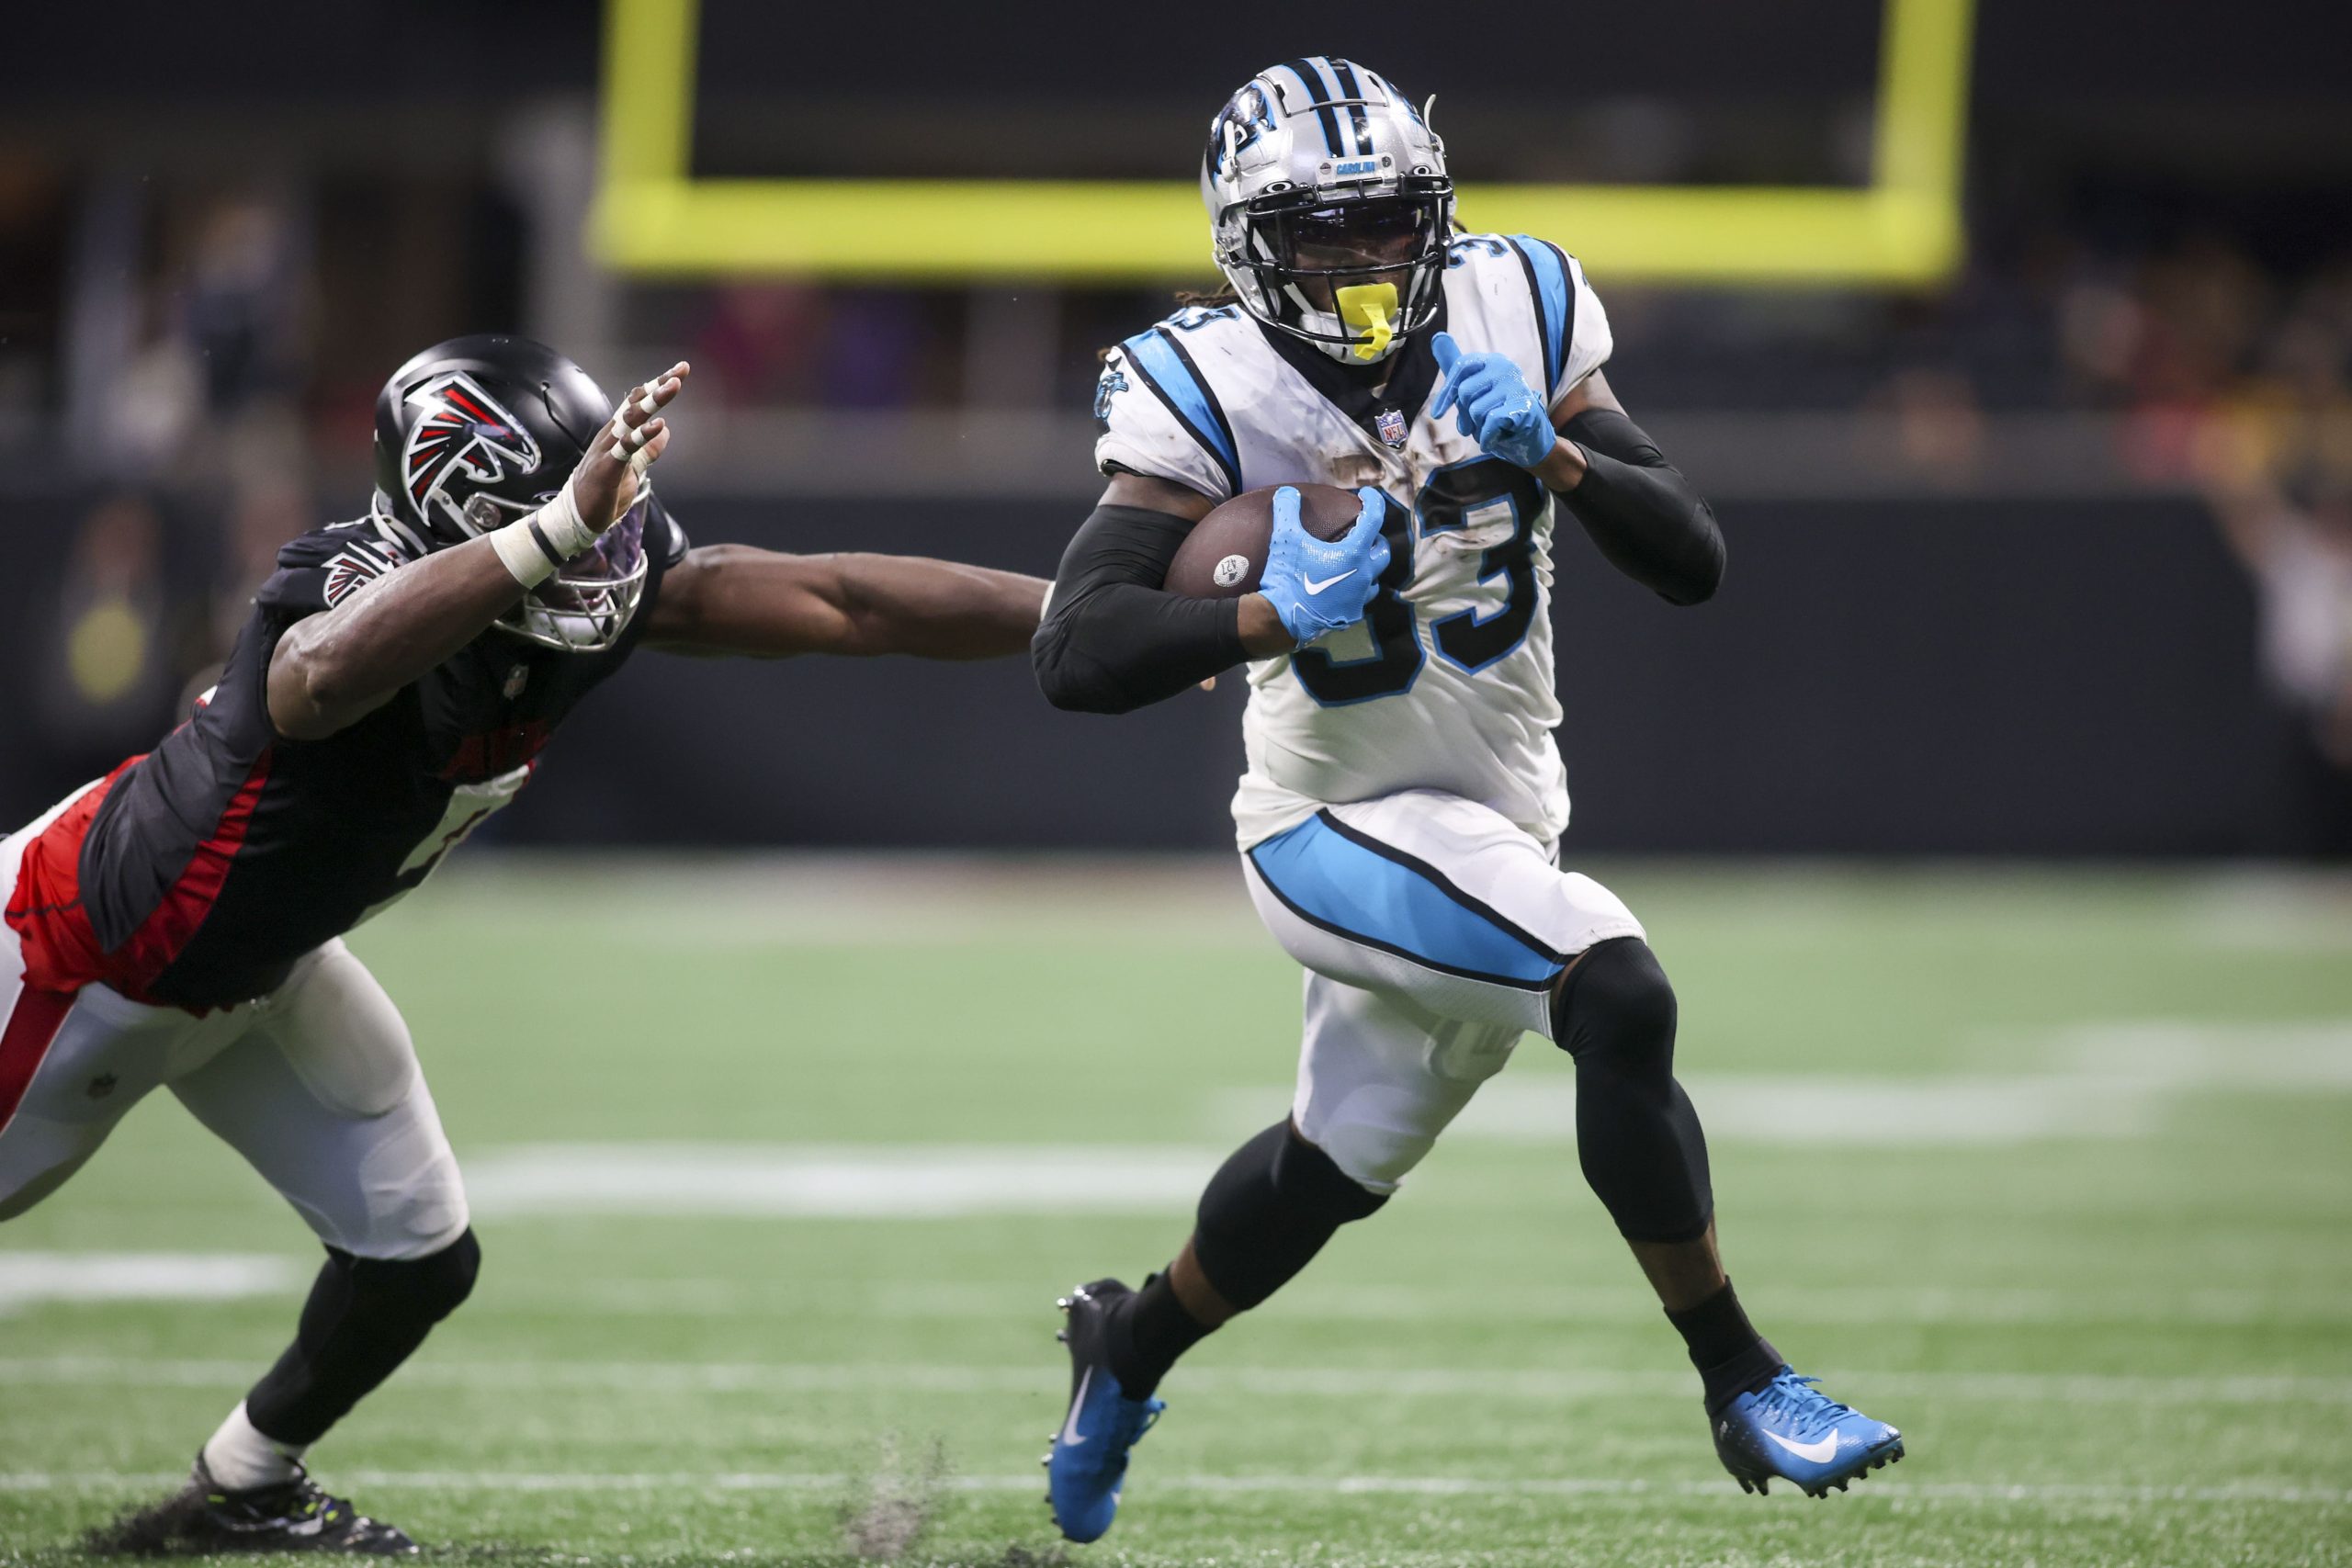 NFL DFS Picks for Falcons vs Panthers Thursday Night